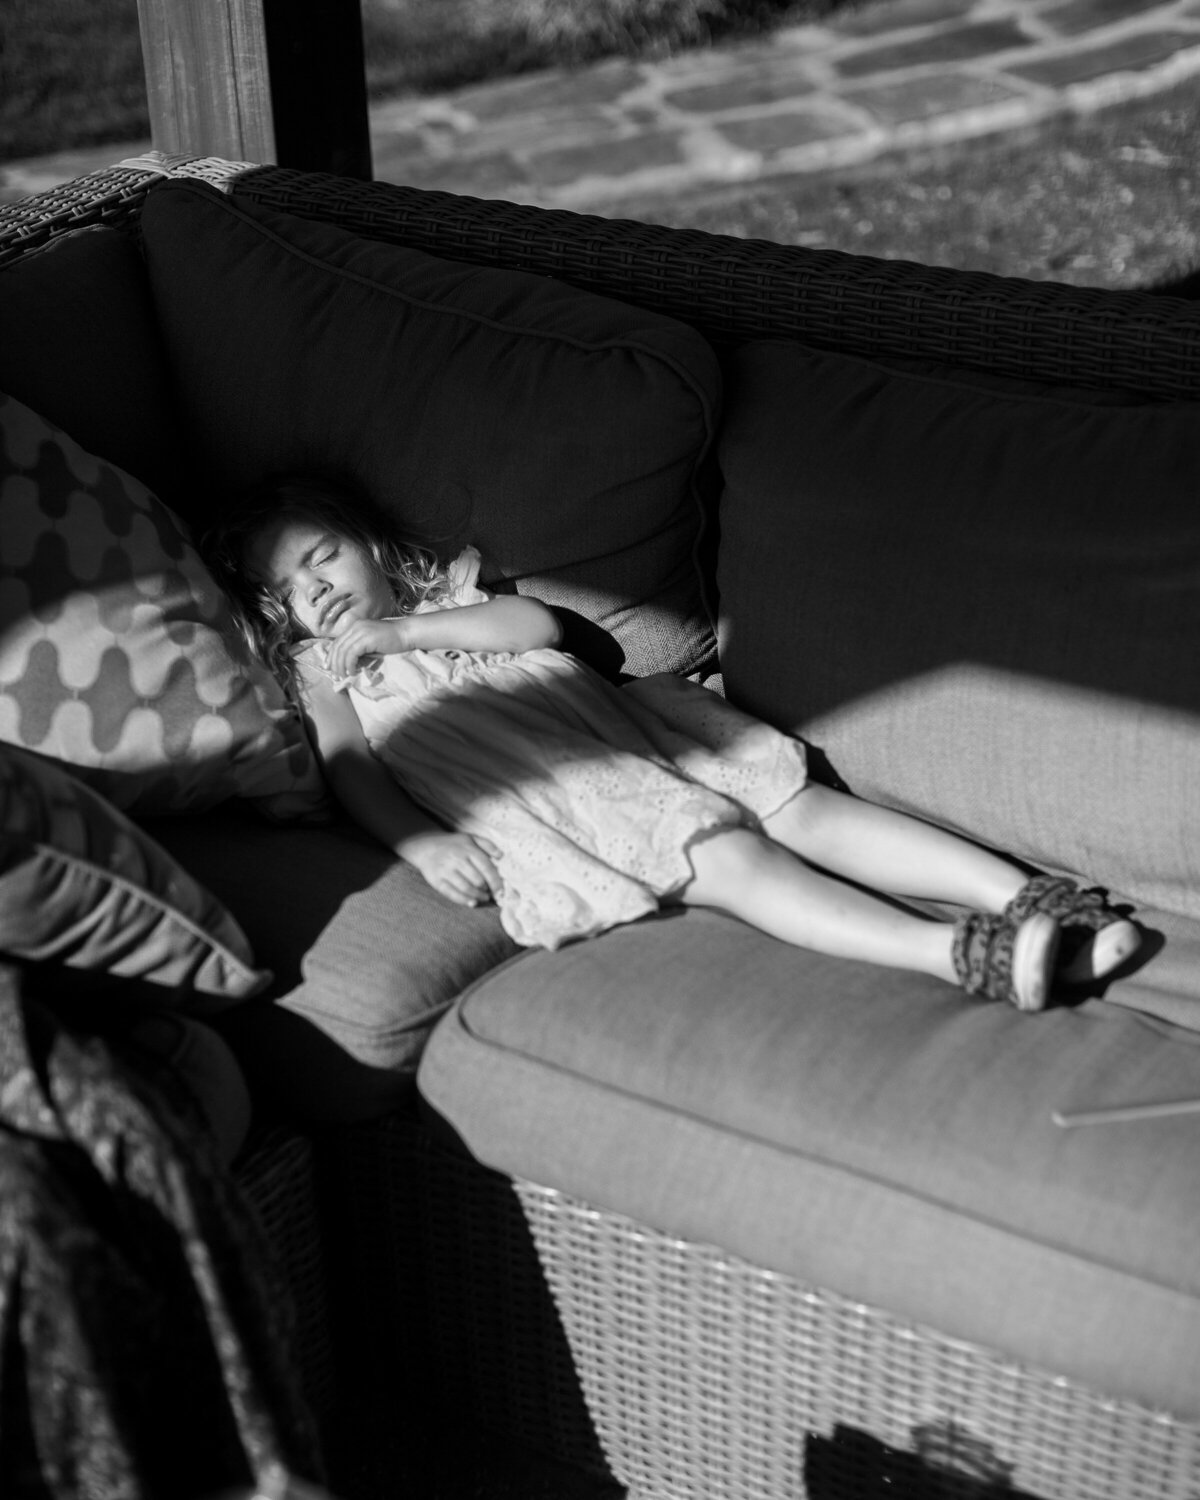 Flower girl naps after the ceremony on a couch